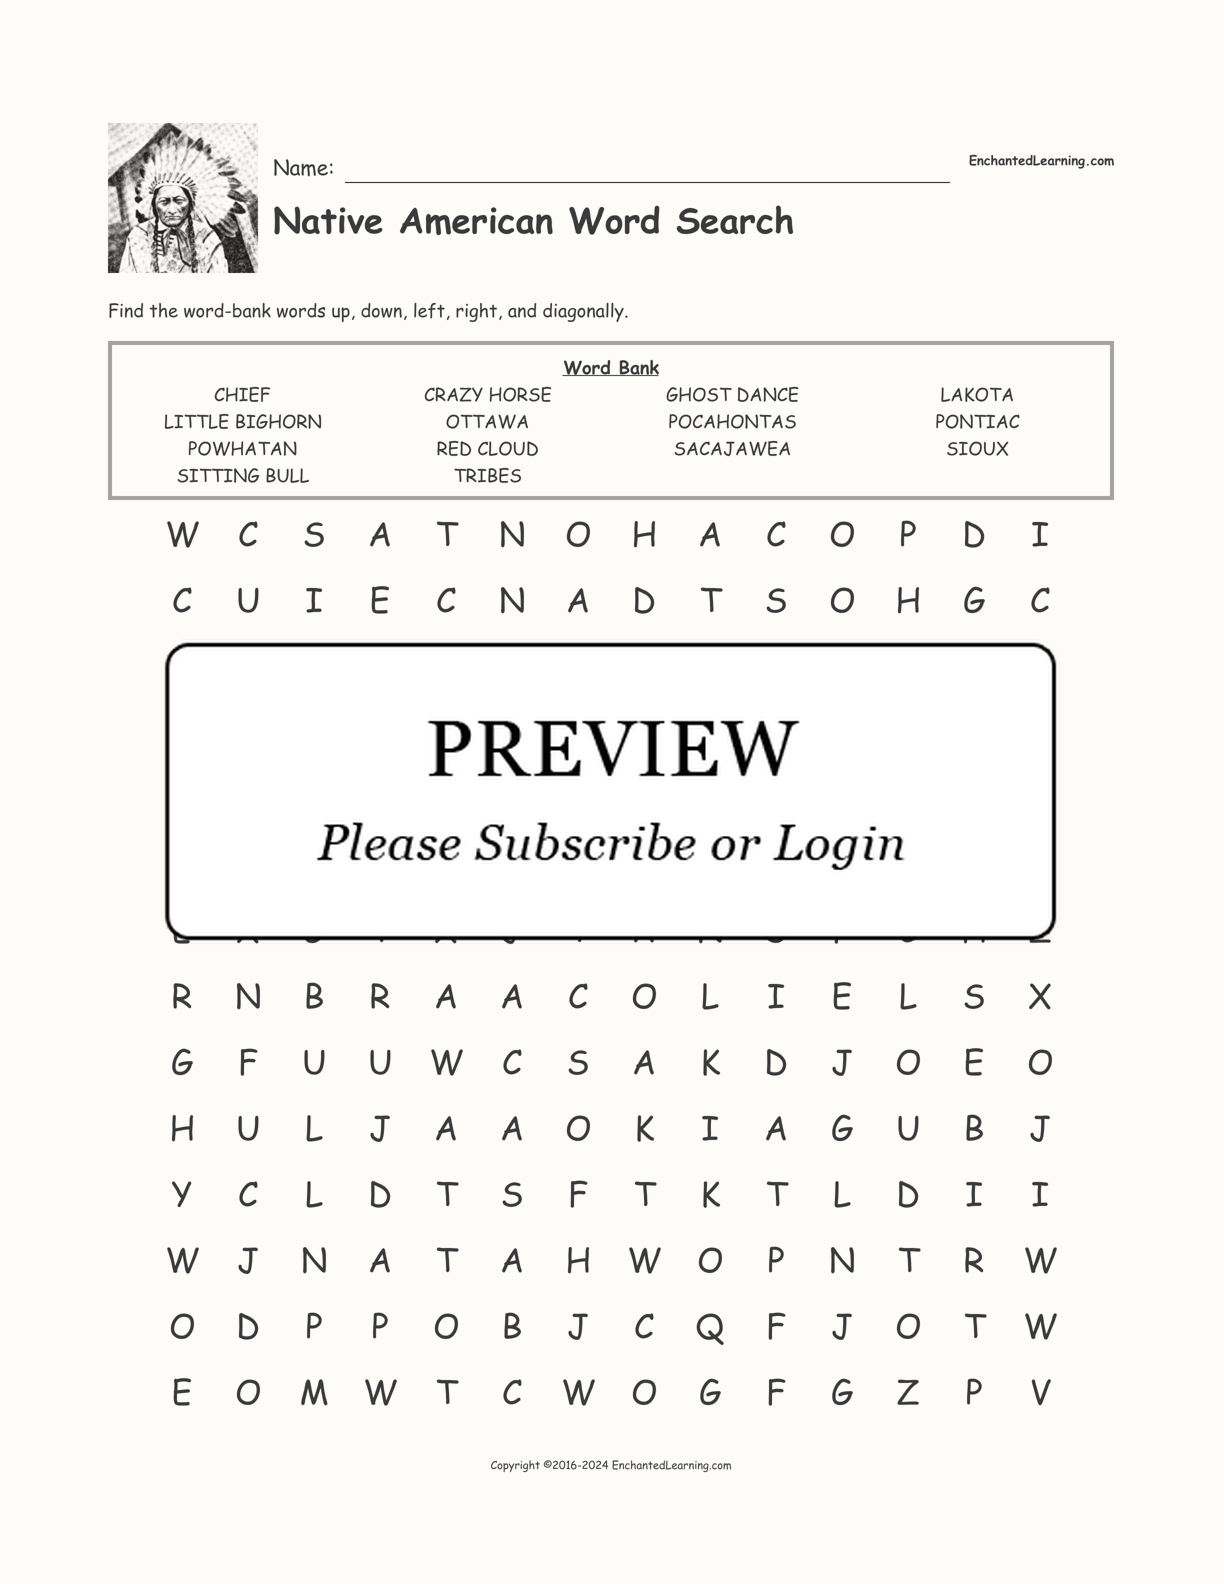 Native American Word Search interactive worksheet page 1